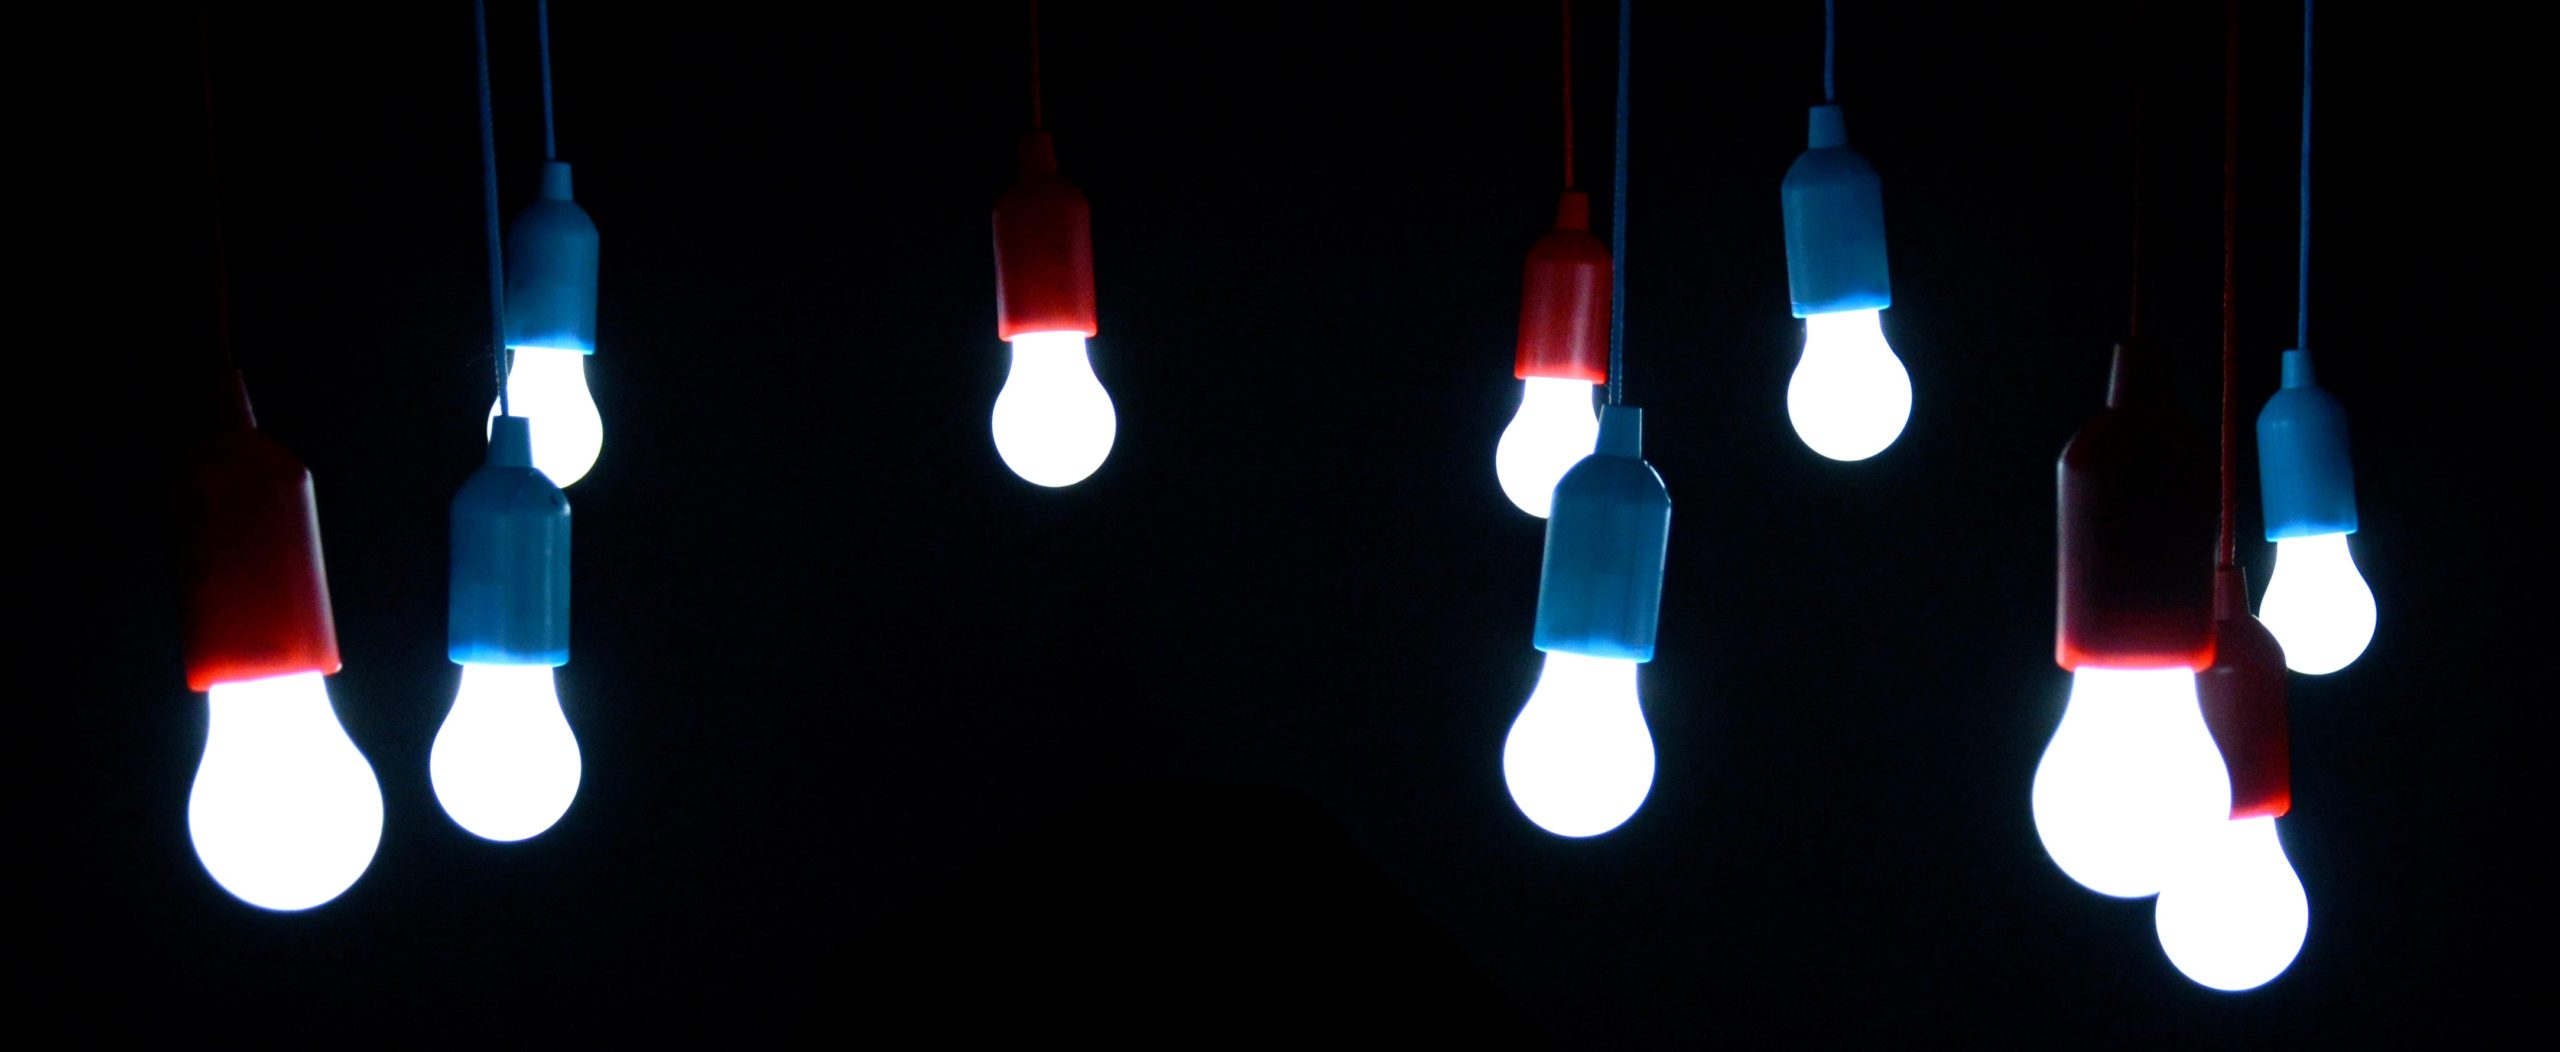 Difference between LED and incandescent